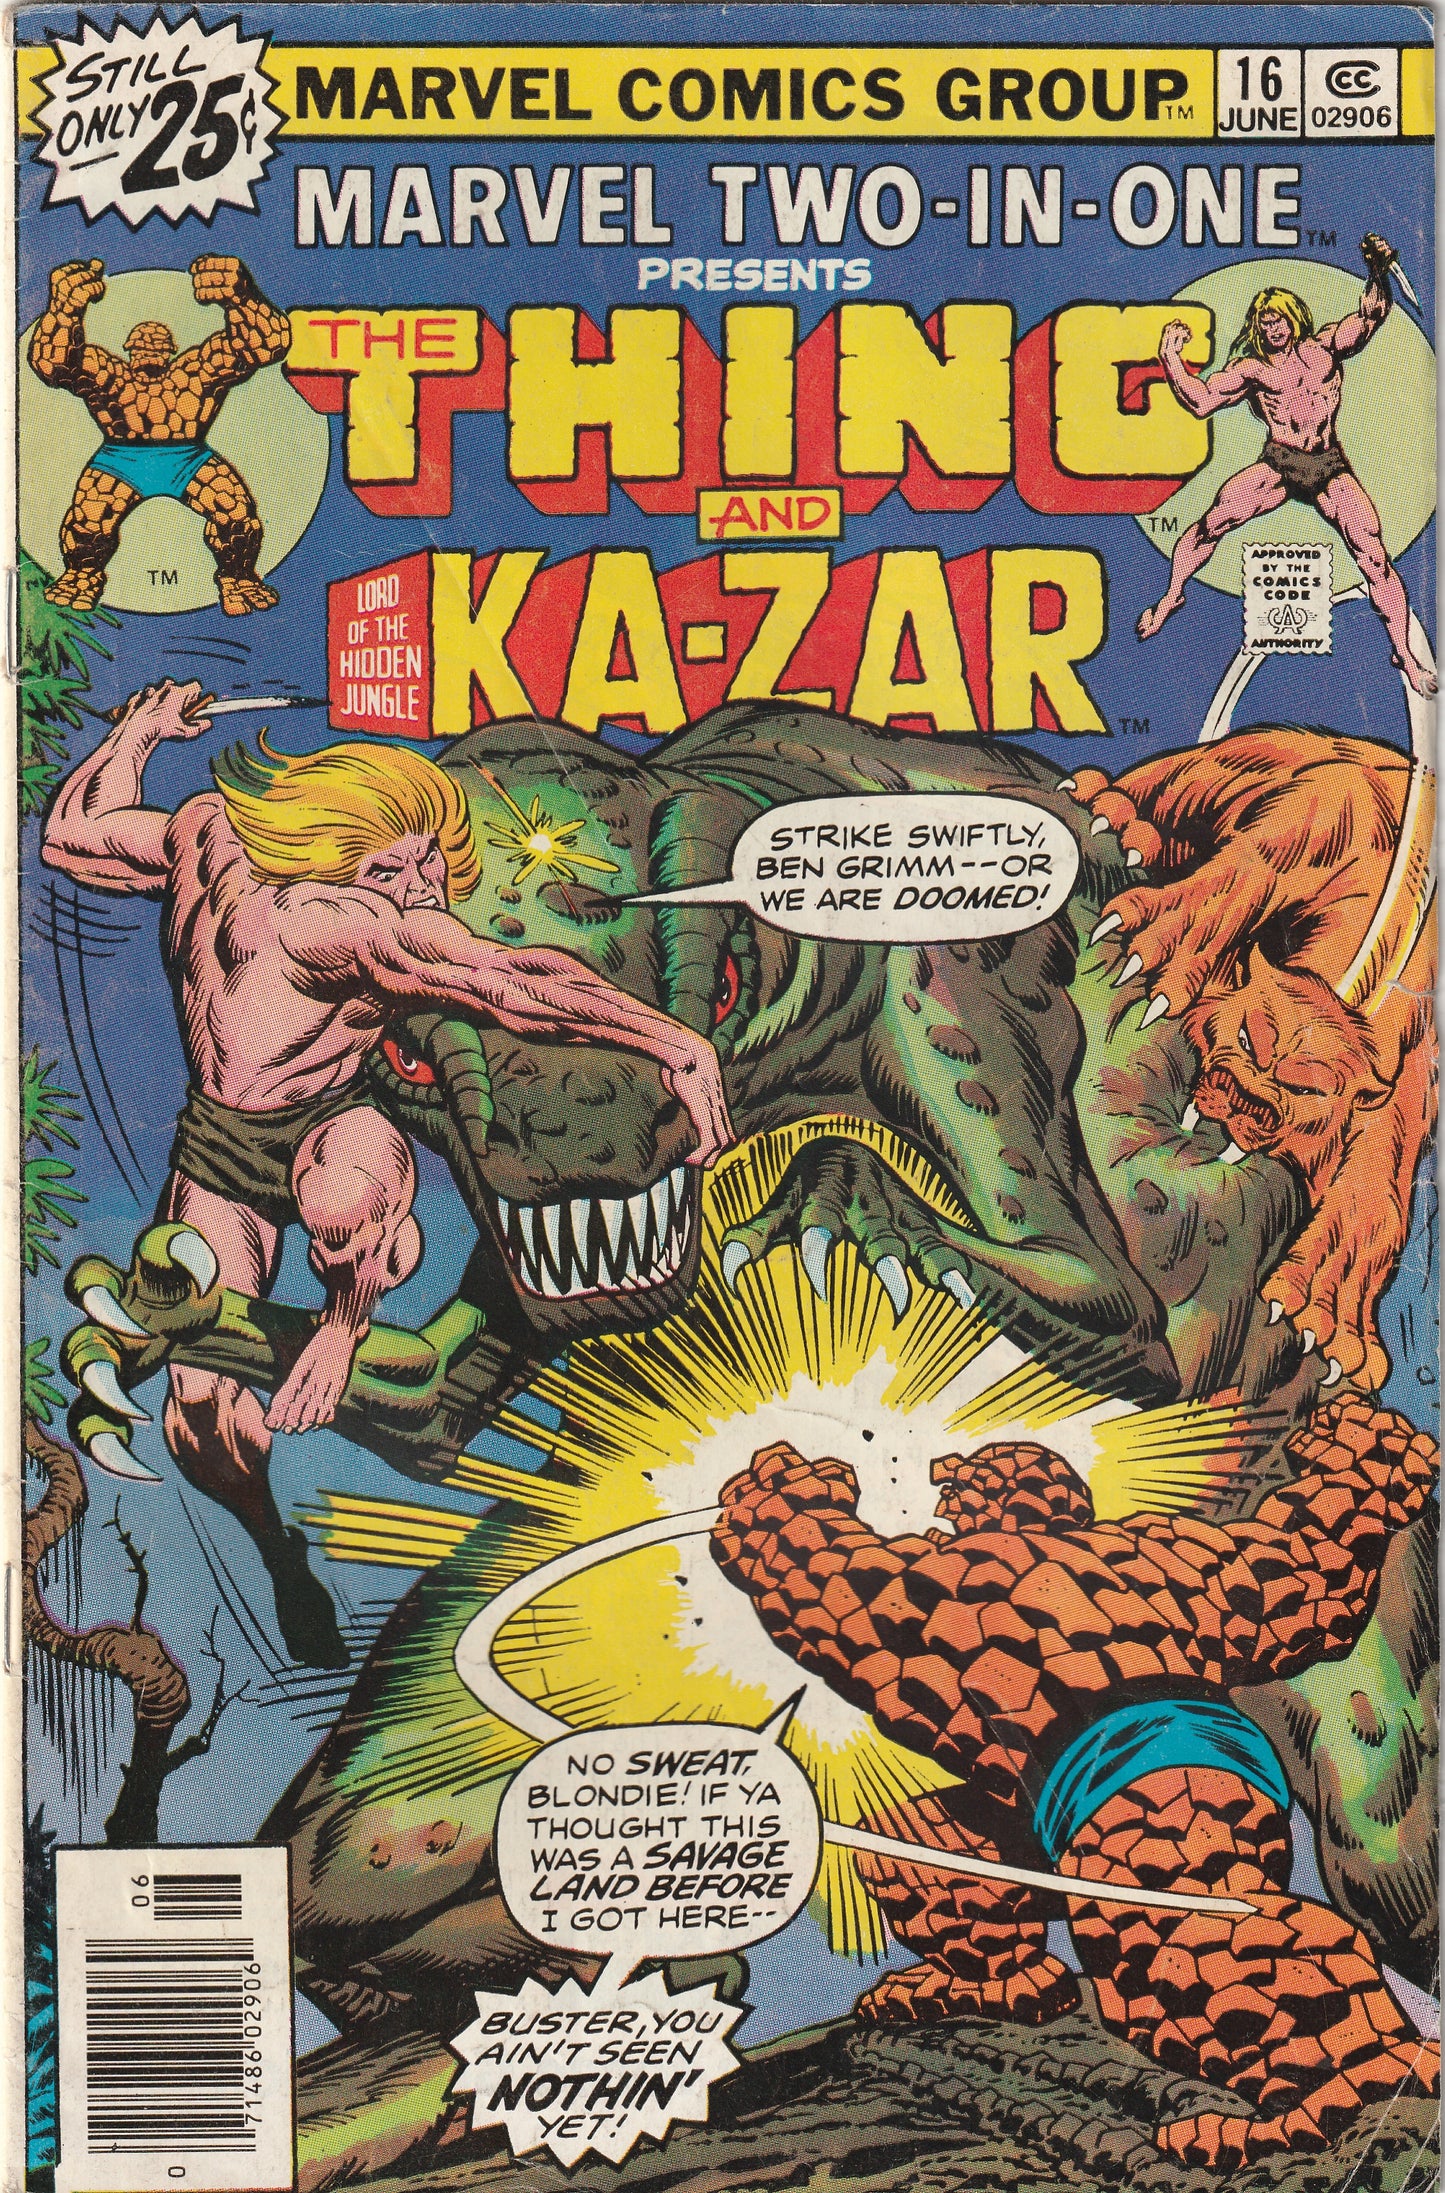 Marvel Two-in-One #16 (1976) - The Thing and Ka-Zar